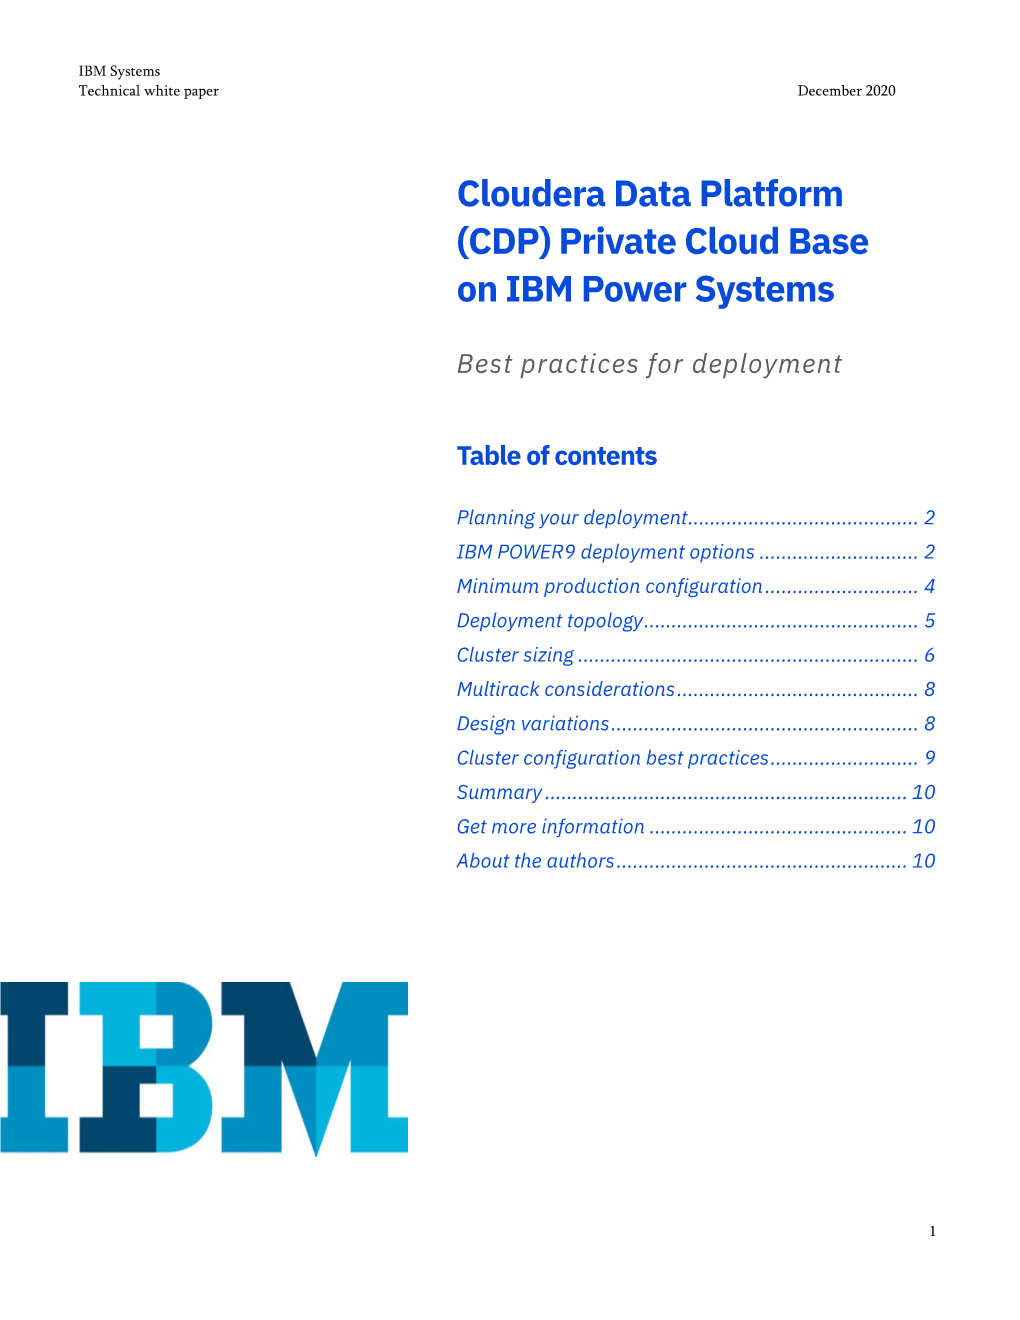 Cloudera Data Platform (CDP) Private Cloud Base on IBM Power Systems